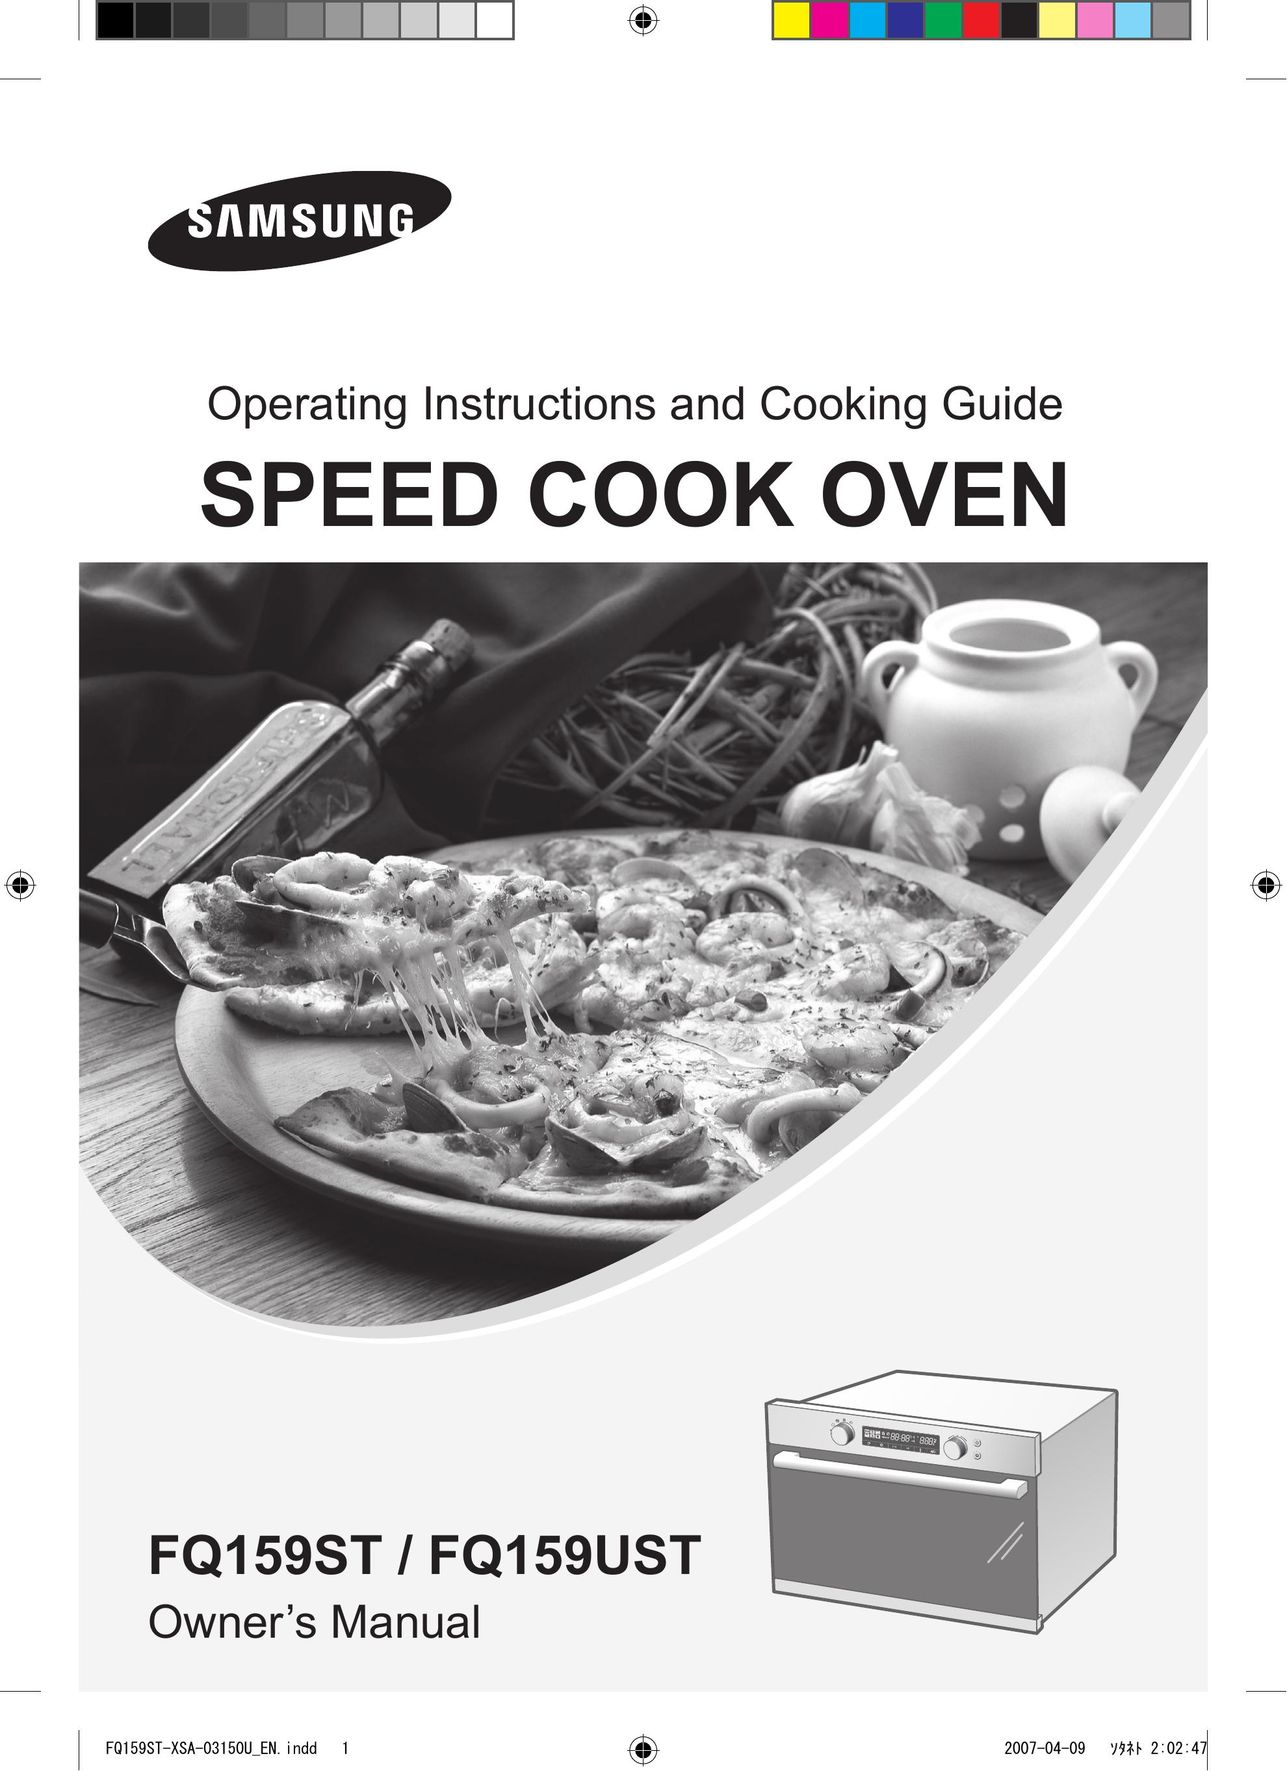 Samsung FQ159ST Oven User Manual